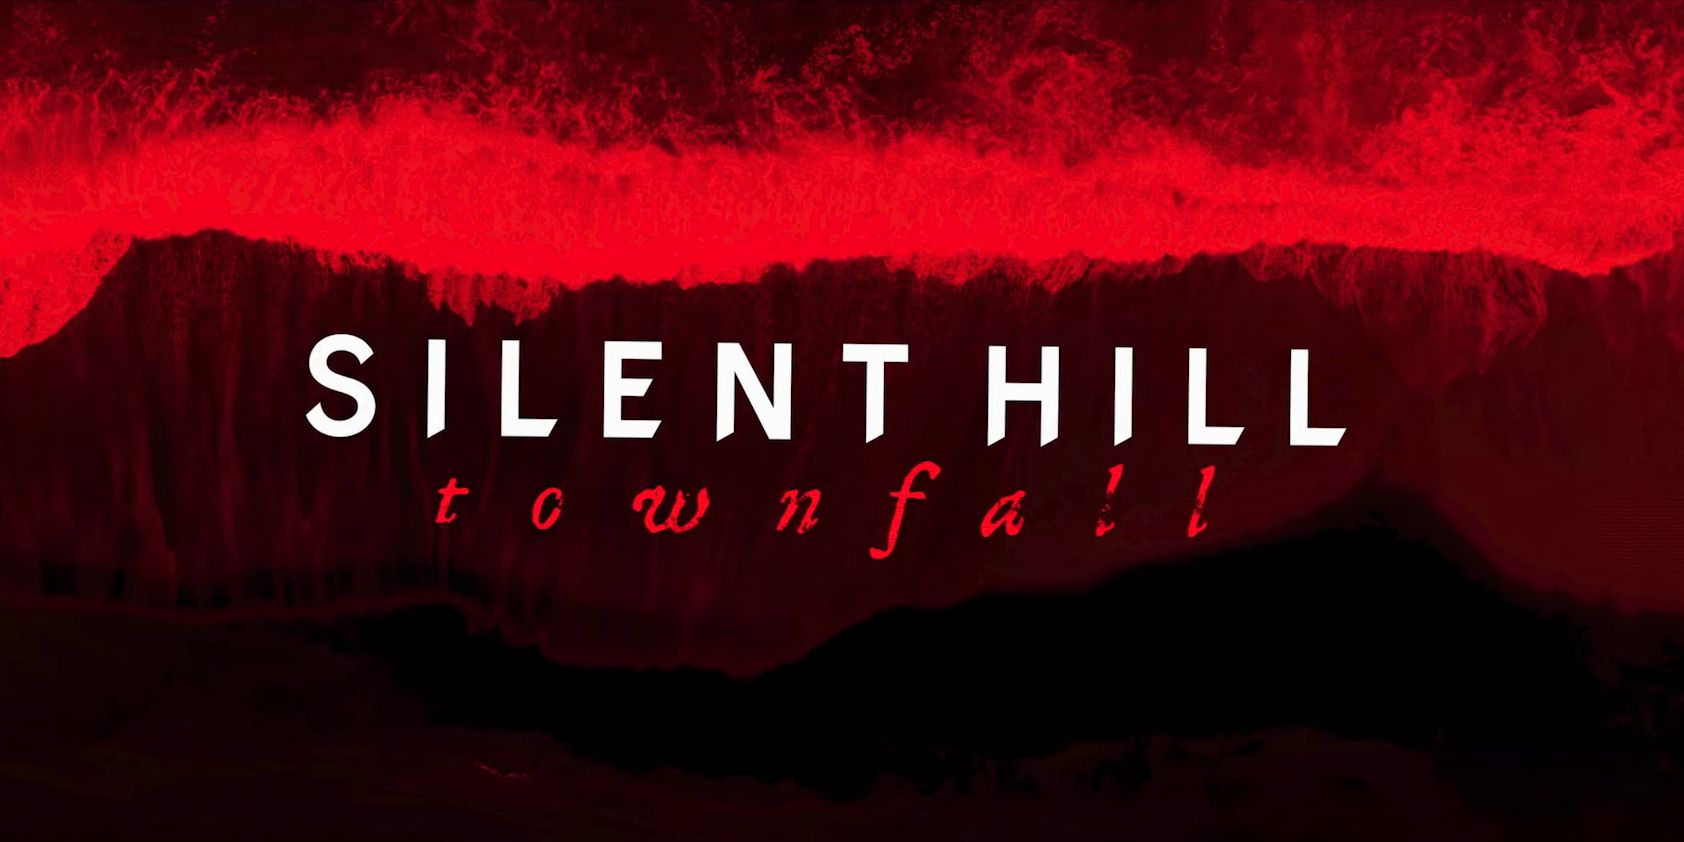 Silent Hill f' release window, trailer, writer, and Ryukishi07 connection